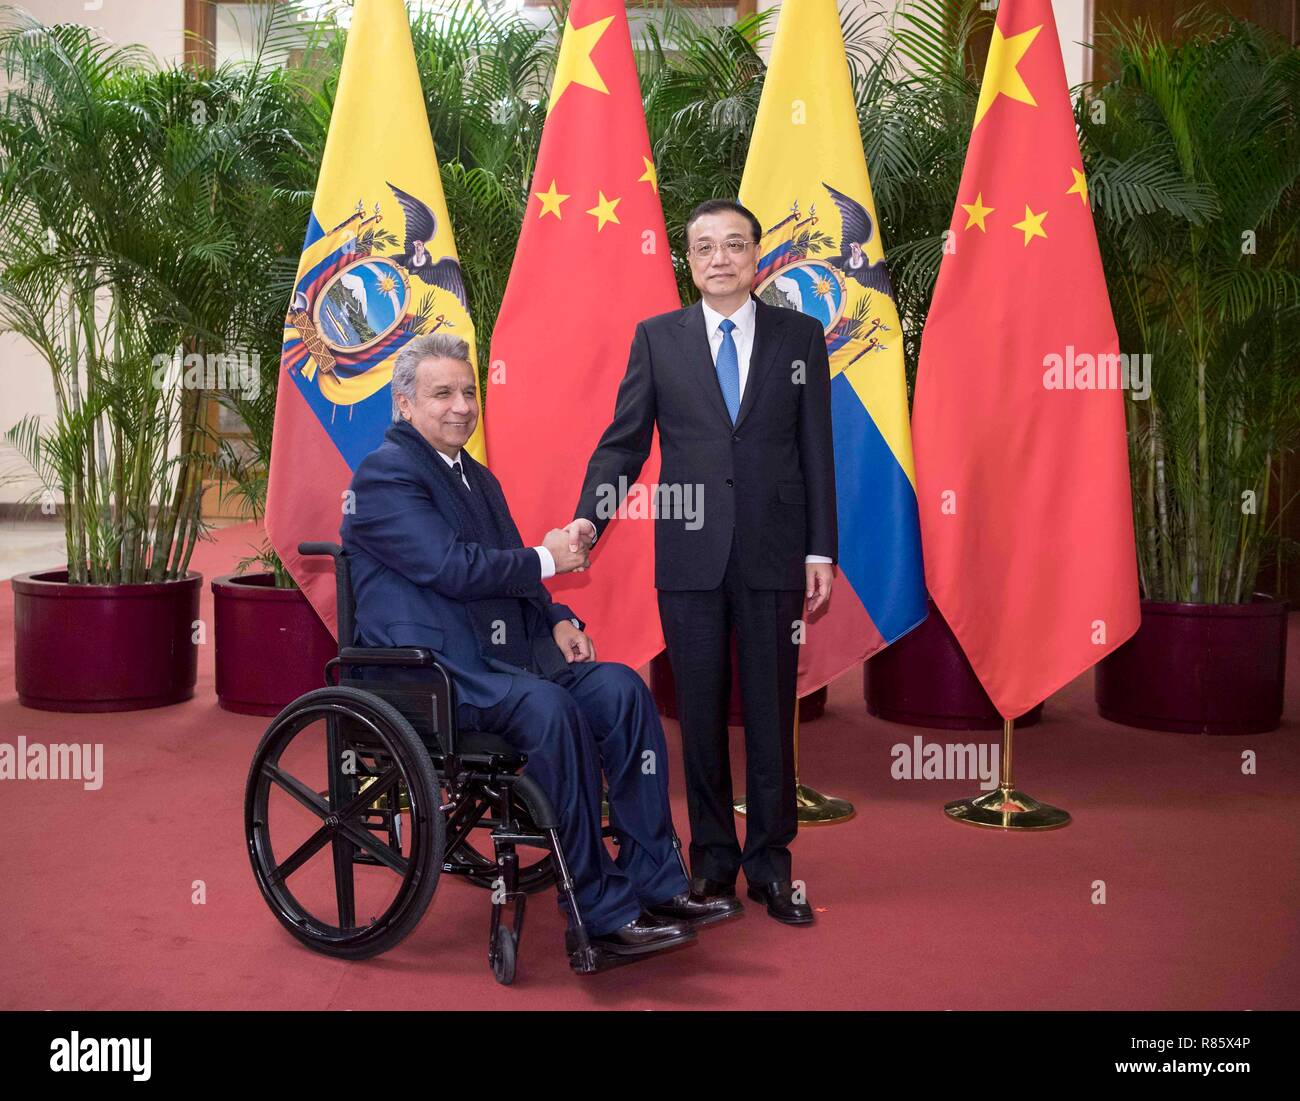 Beijing, China. 13th Dec, 2018. Chinese Premier Li Keqiang (R) meets with Ecuadorian President Lenin Moreno at the Great Hall of the People in Beijing, capital of China, Dec. 13, 2018. Credit: Li Tao/Xinhua/Alamy Live News Stock Photo